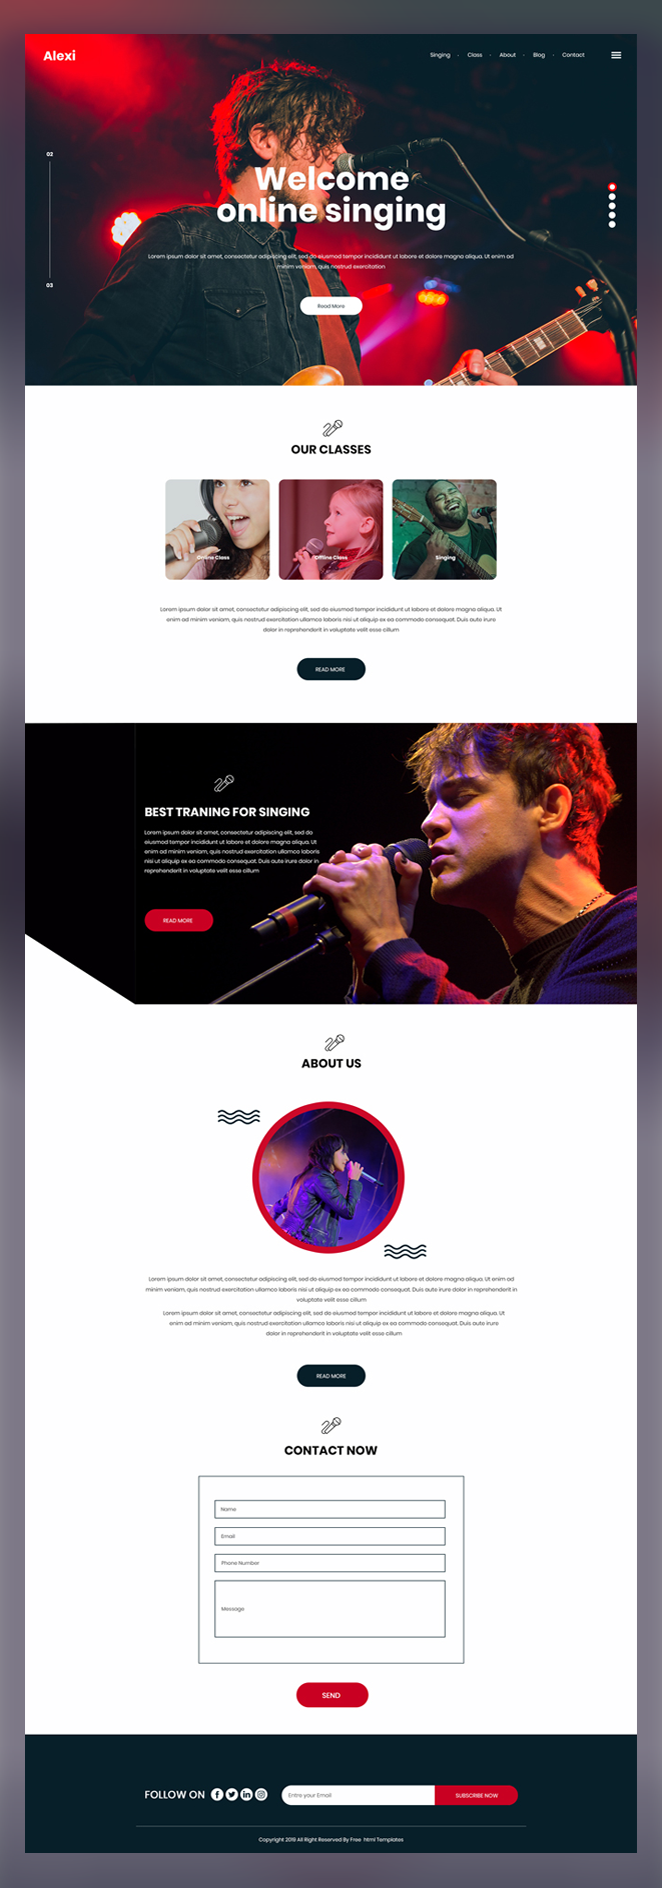 Alexi online singing psd template